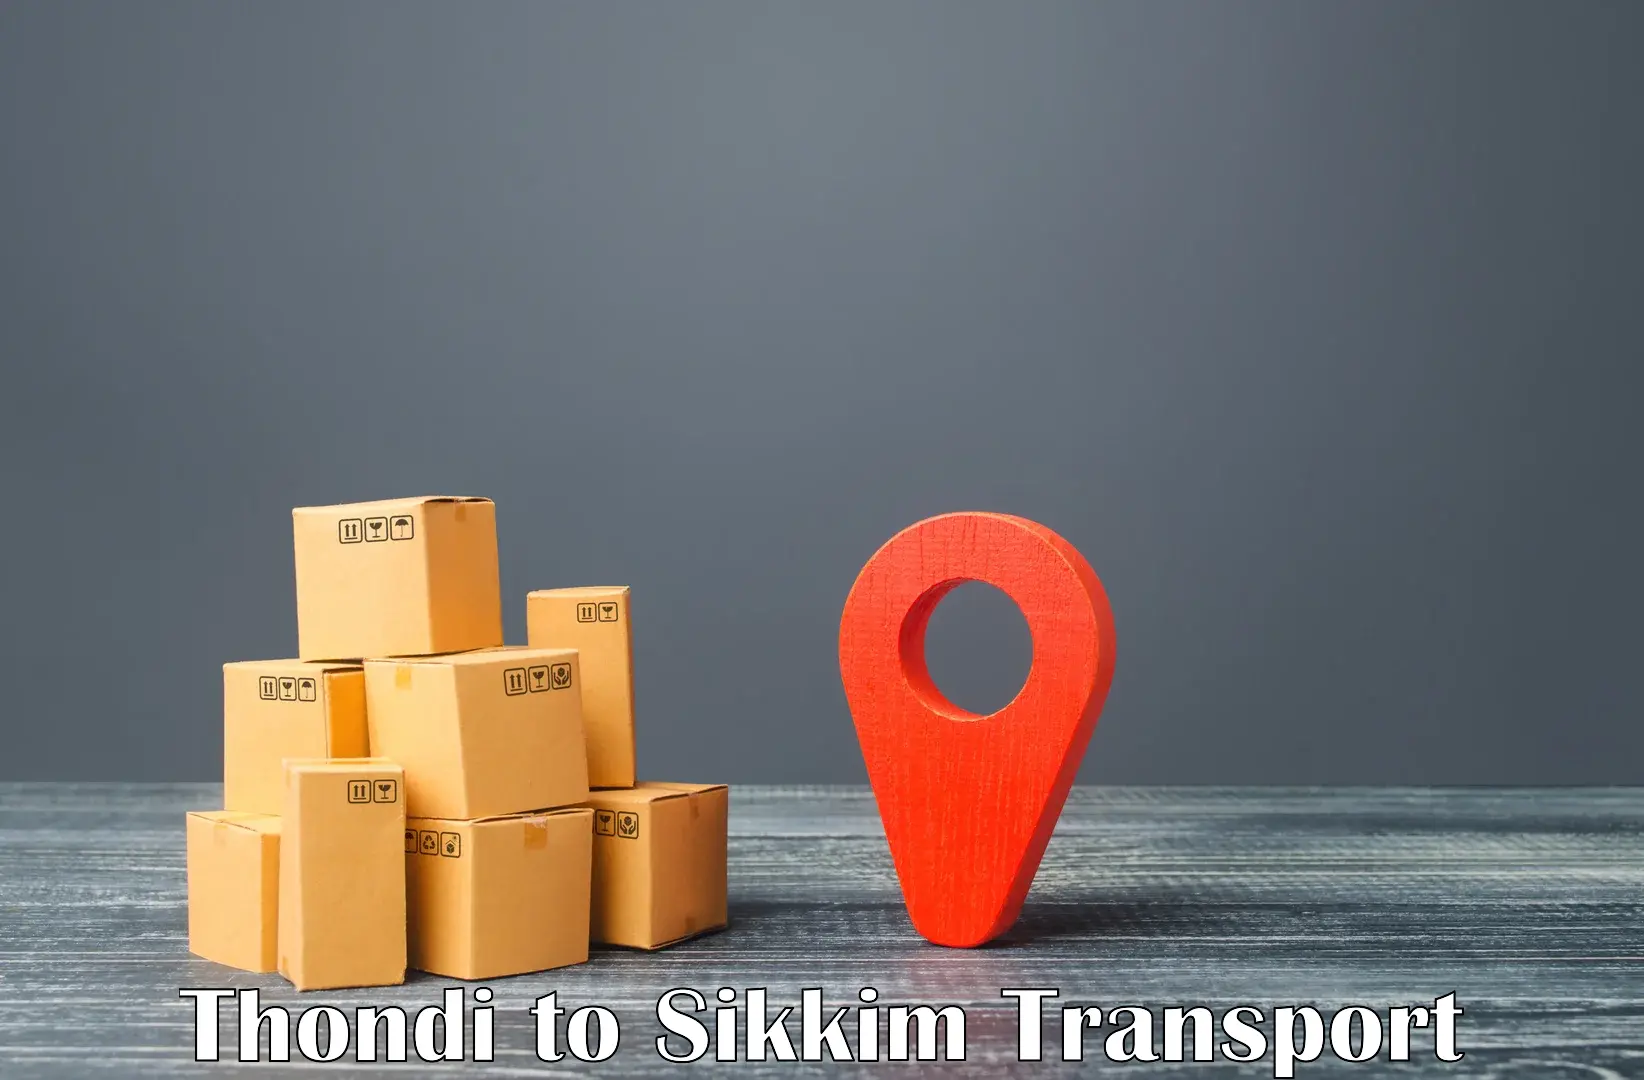 Express transport services Thondi to South Sikkim